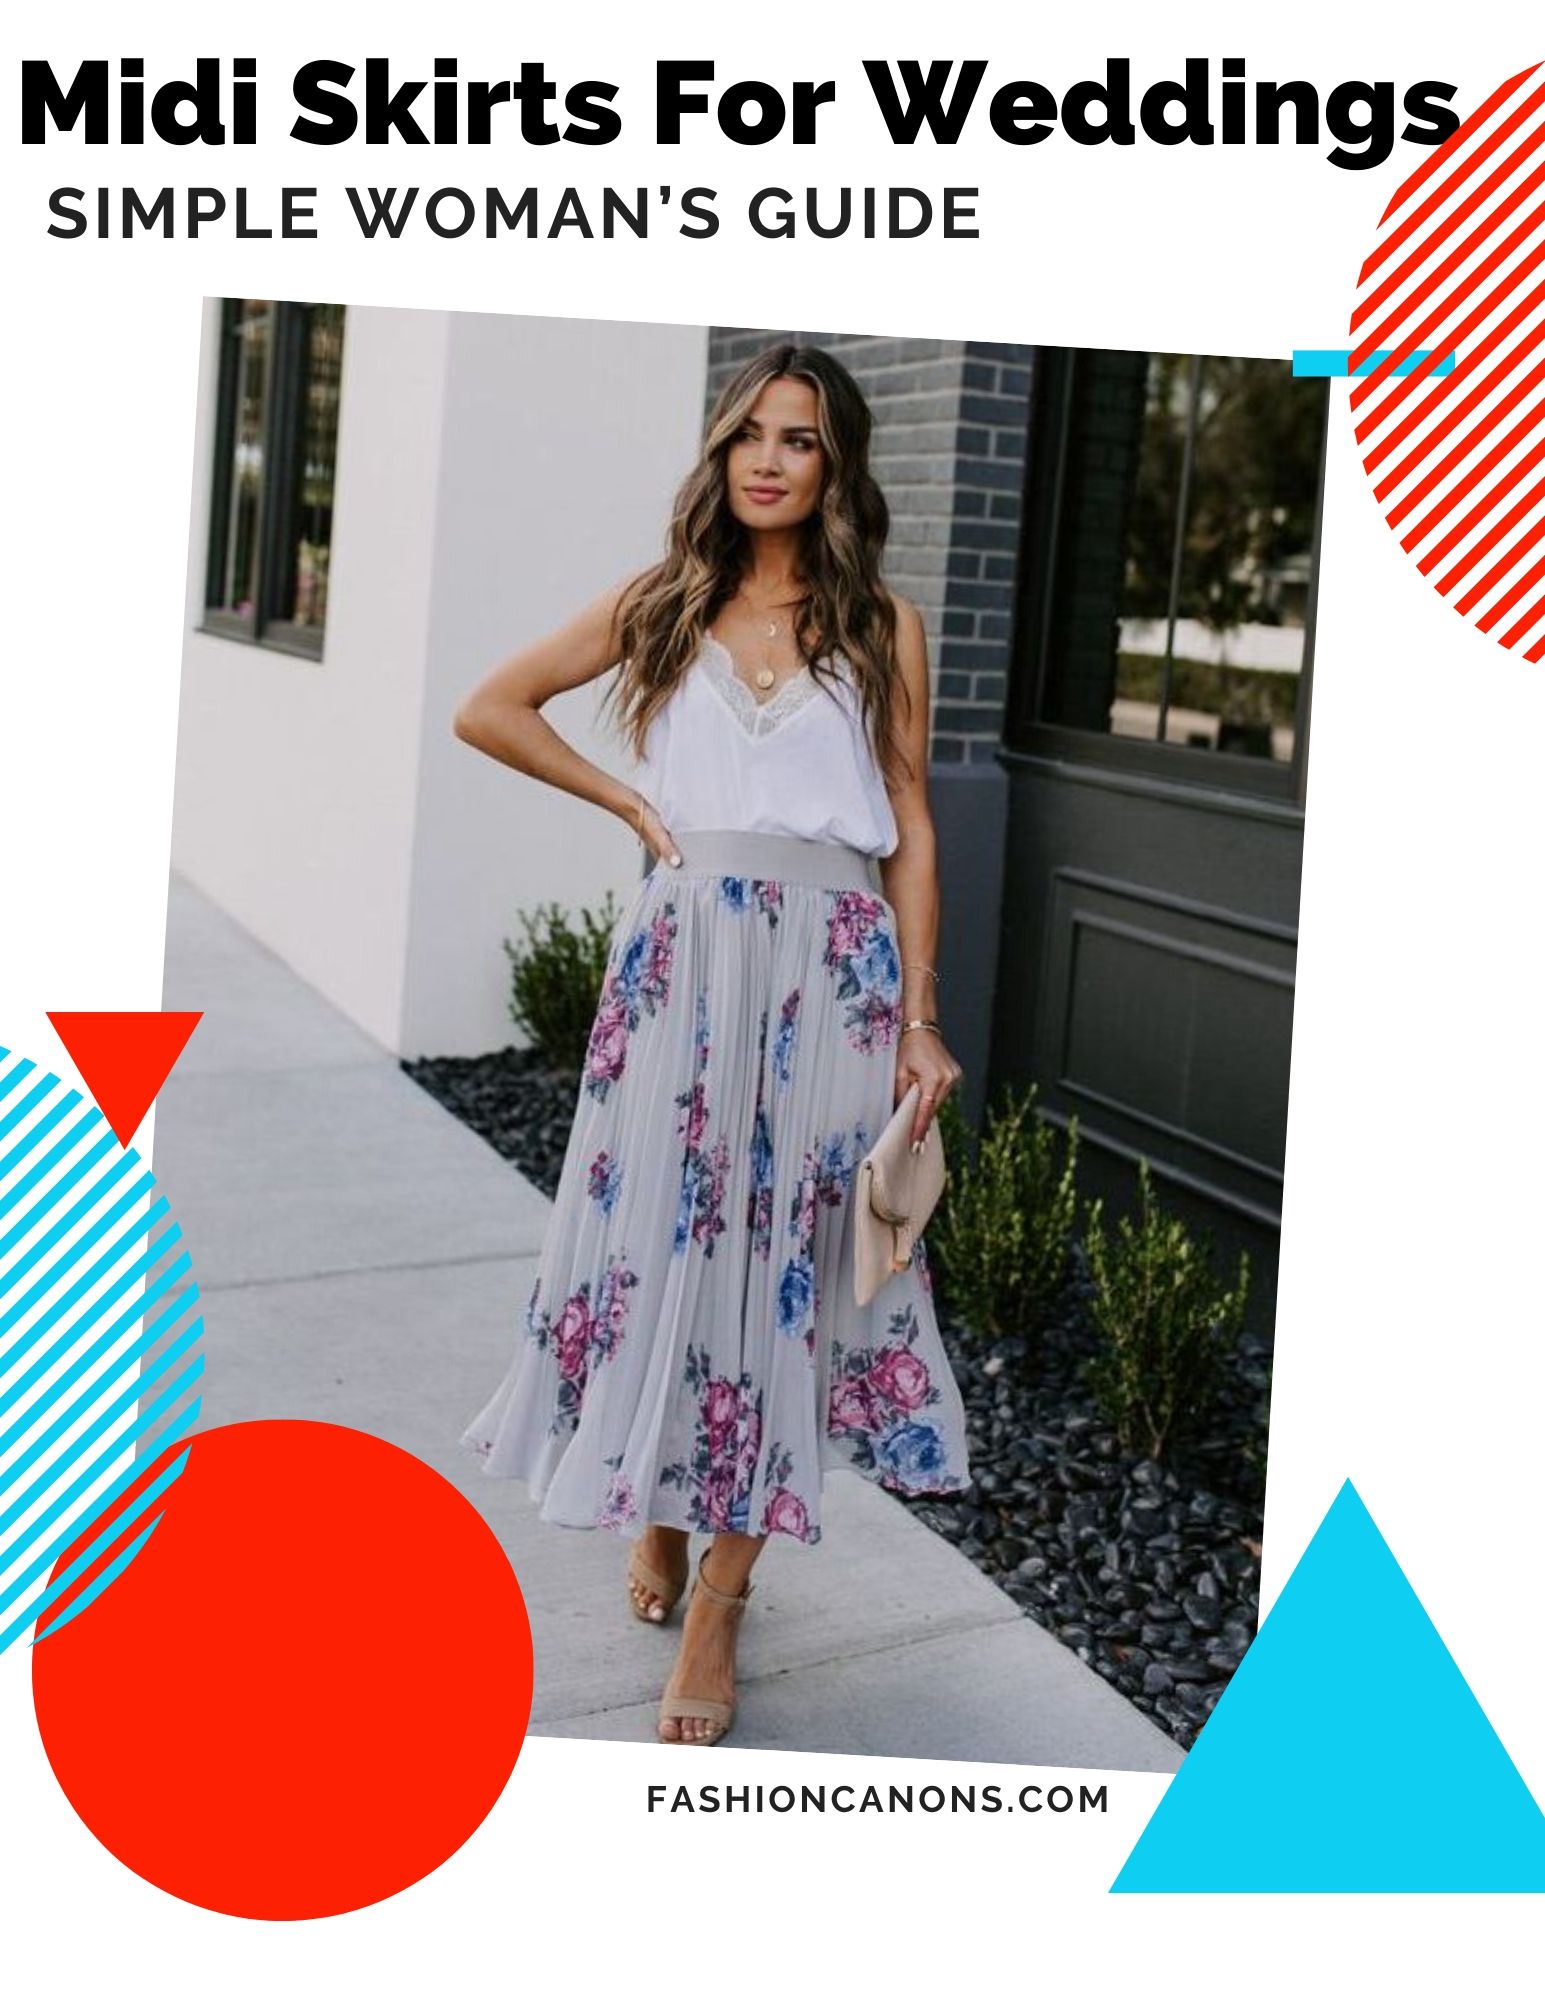 What Midi Skirts Can I Wear To A Wedding: A Simple Woman's Guide 2023 ...